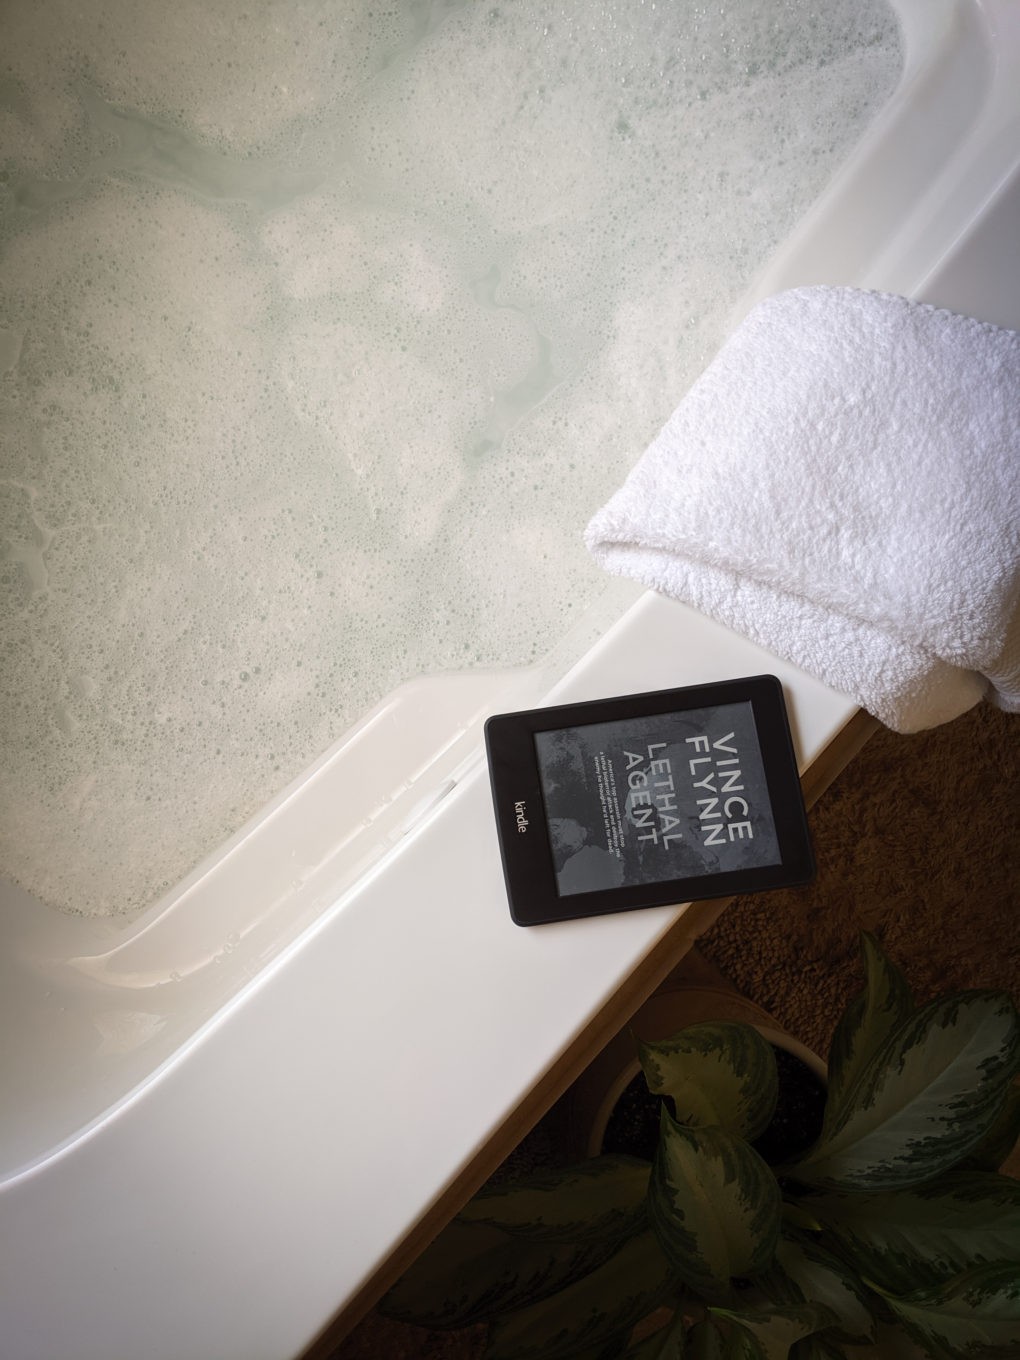 5. Read a book, watch a show, or take a nap. Ten ways to make your bath extra relaxing. The ultimate bathtime experience in the tub includes ideas like turning off the lights and lighting candles by the bathtub, sipping a cold drink and snacking on treats, using a bath bomb, etc. Learn how to treat yourself right with a soothing bath fit for a spa.